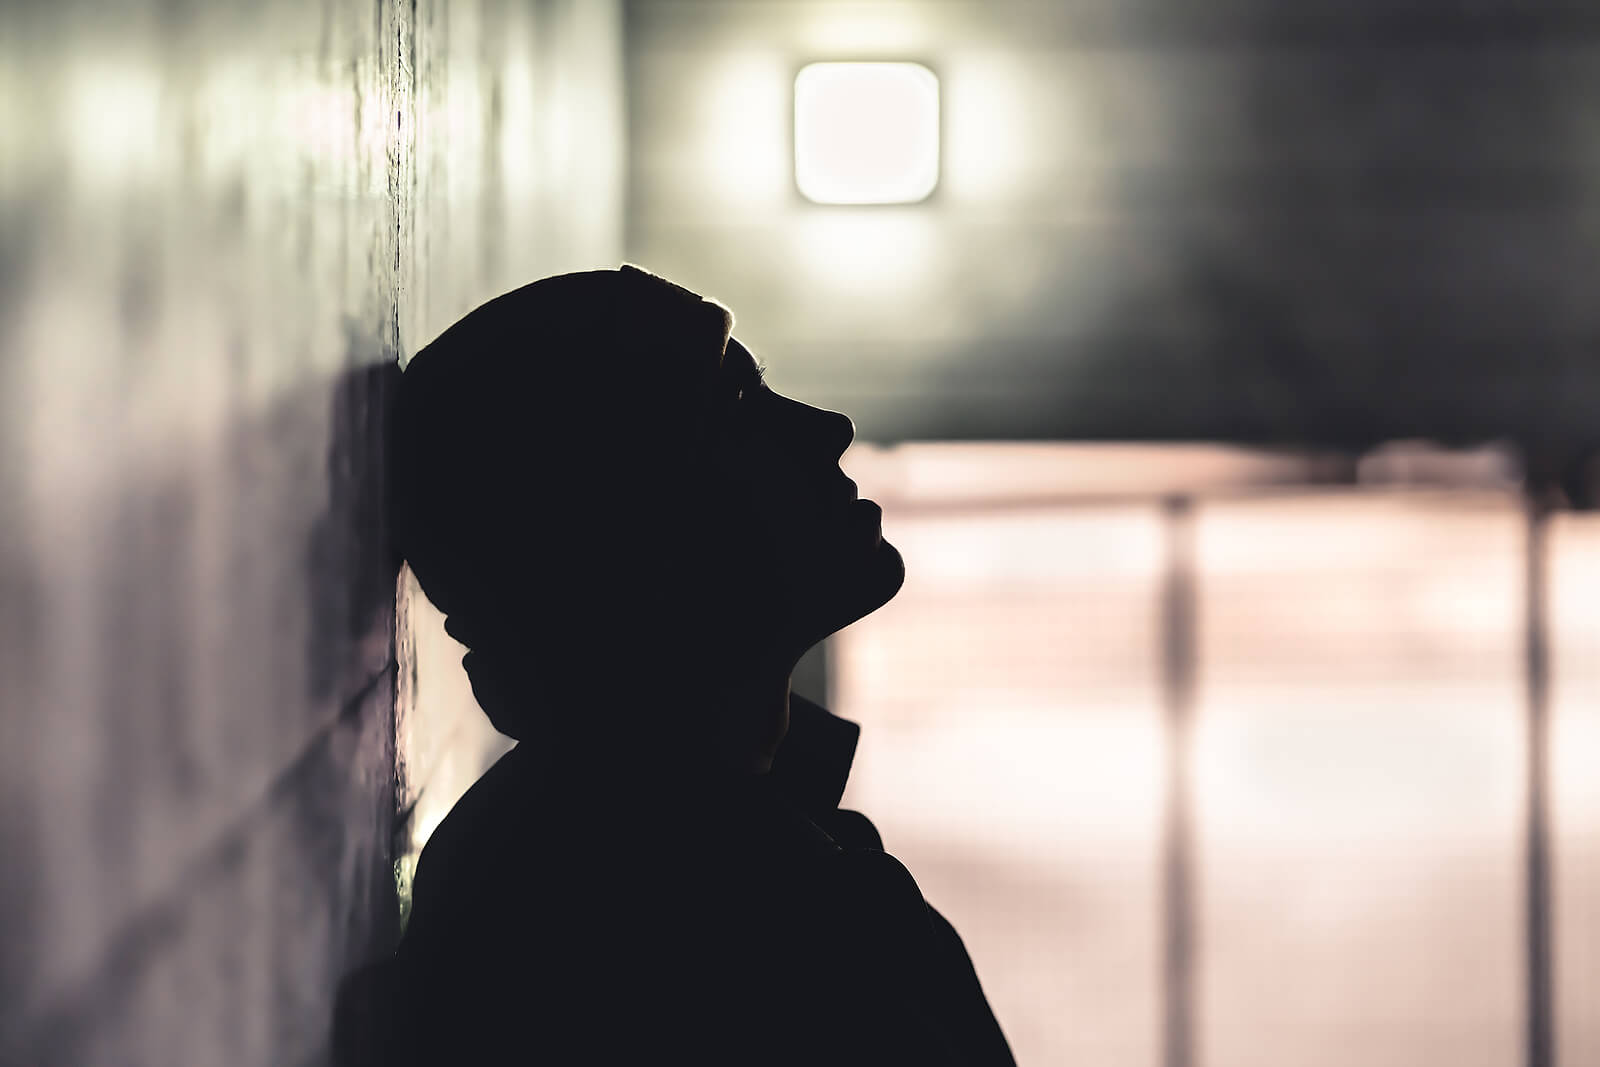 Silhouette of young man in a darkened hallway with his head leaning back against the wall representing the darkness we can live in when shame over past trauma controls us. Trauma-Focused Therapy Services in Ohio can help bring you into the light.